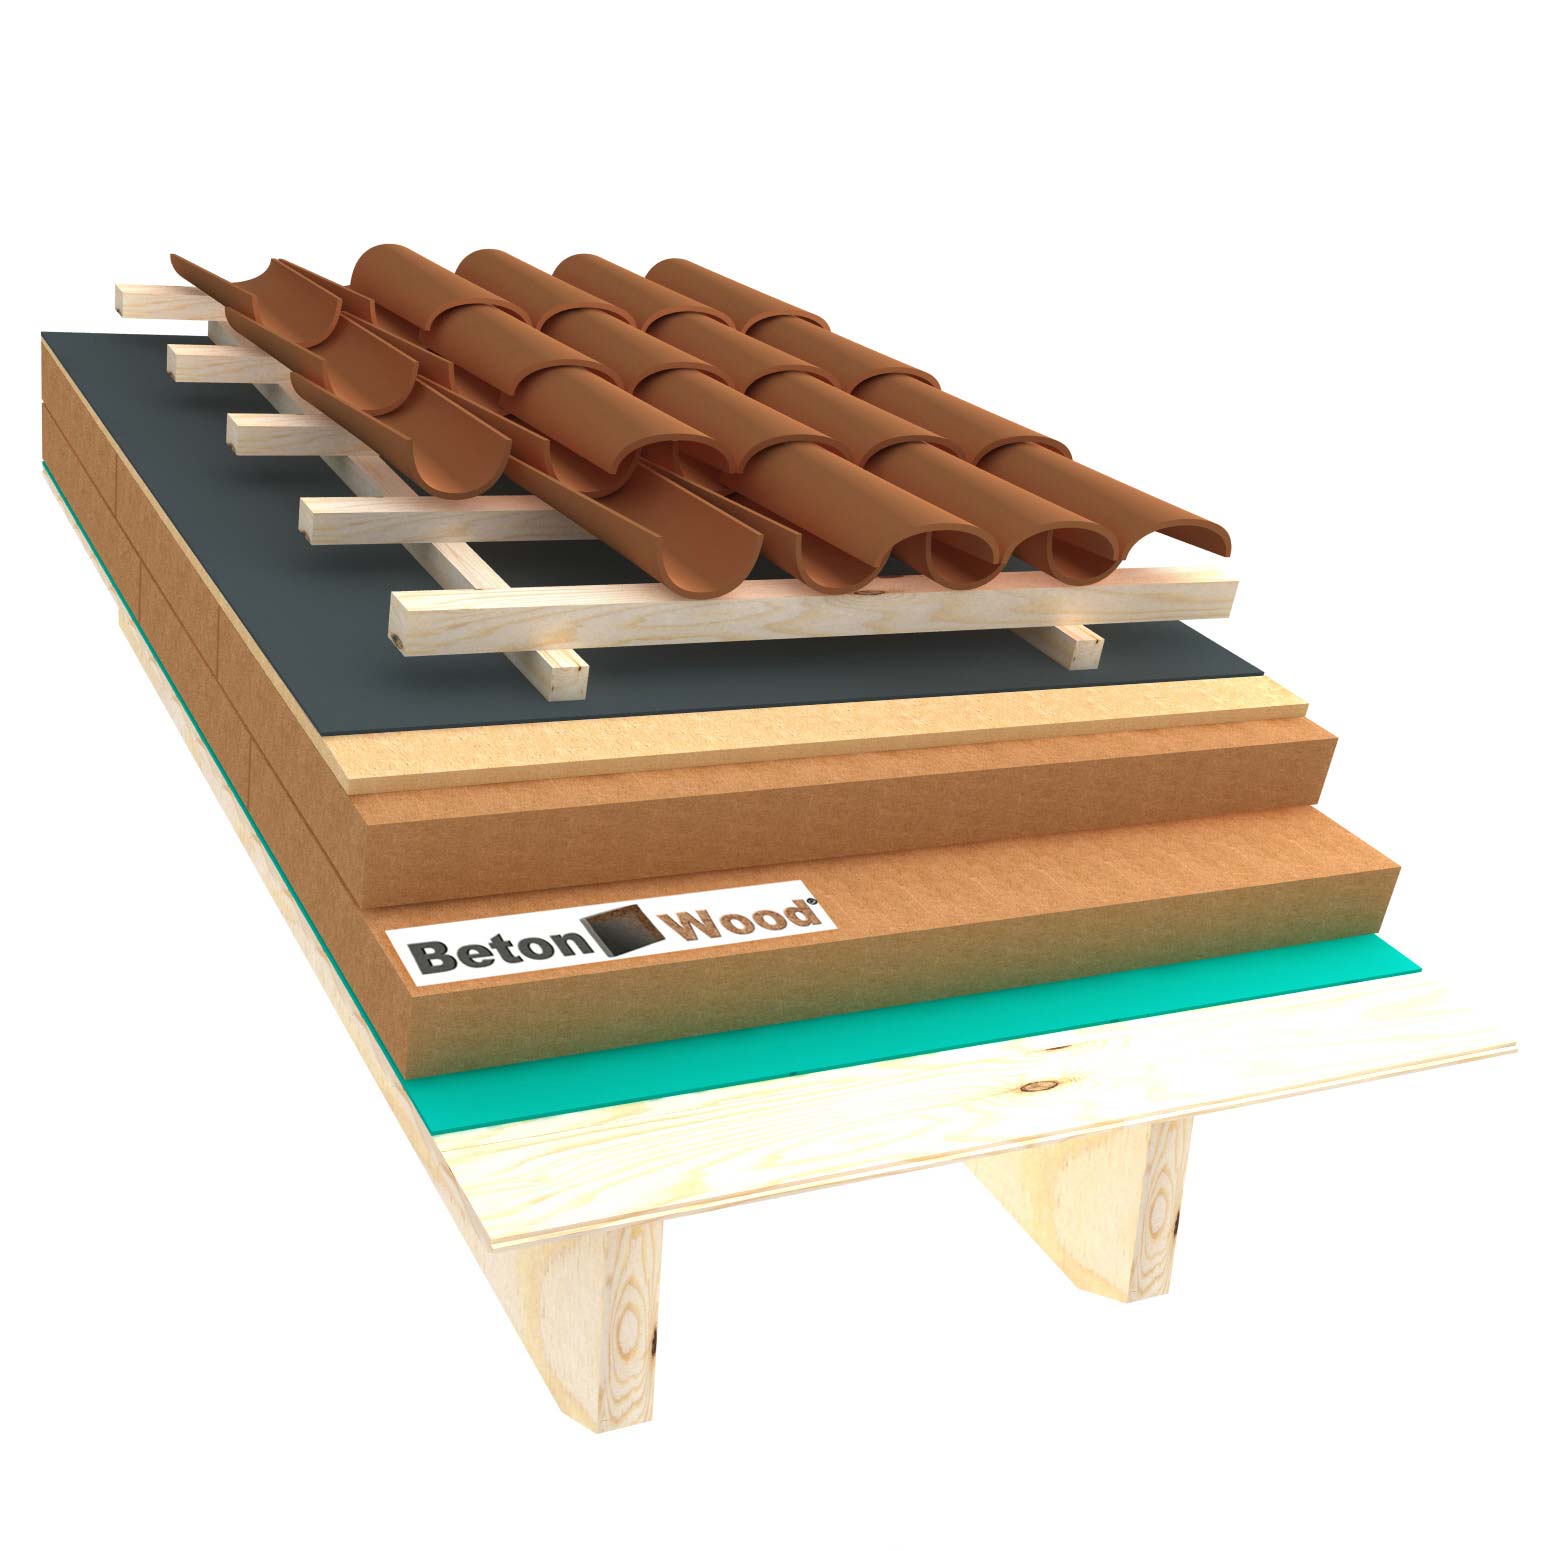 Ventilated roof with fiber wood Isorel and Therm on matchboarding